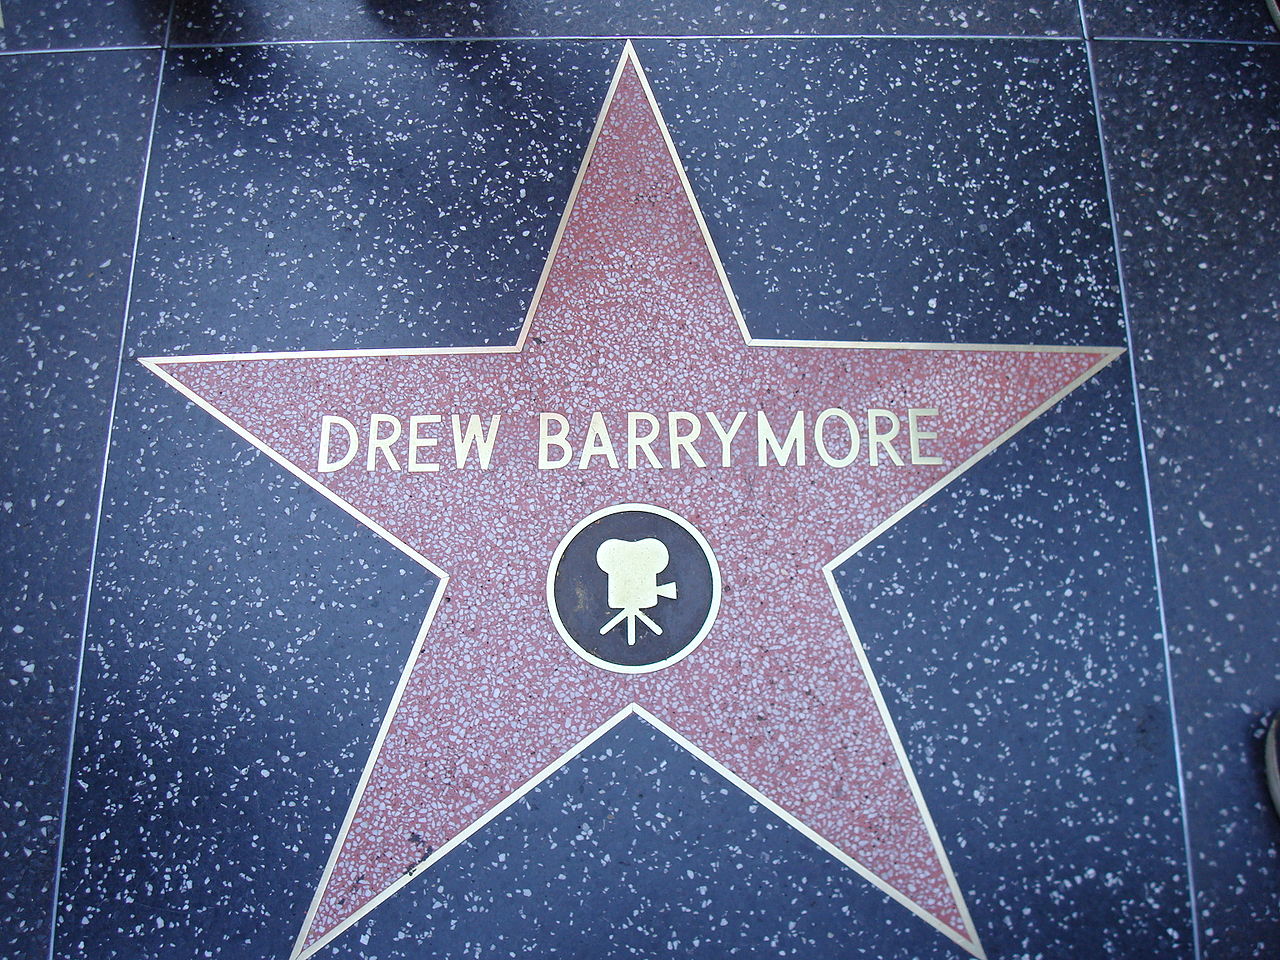 Drew Barrymore’s star on the Hollywood Walk of Fame.